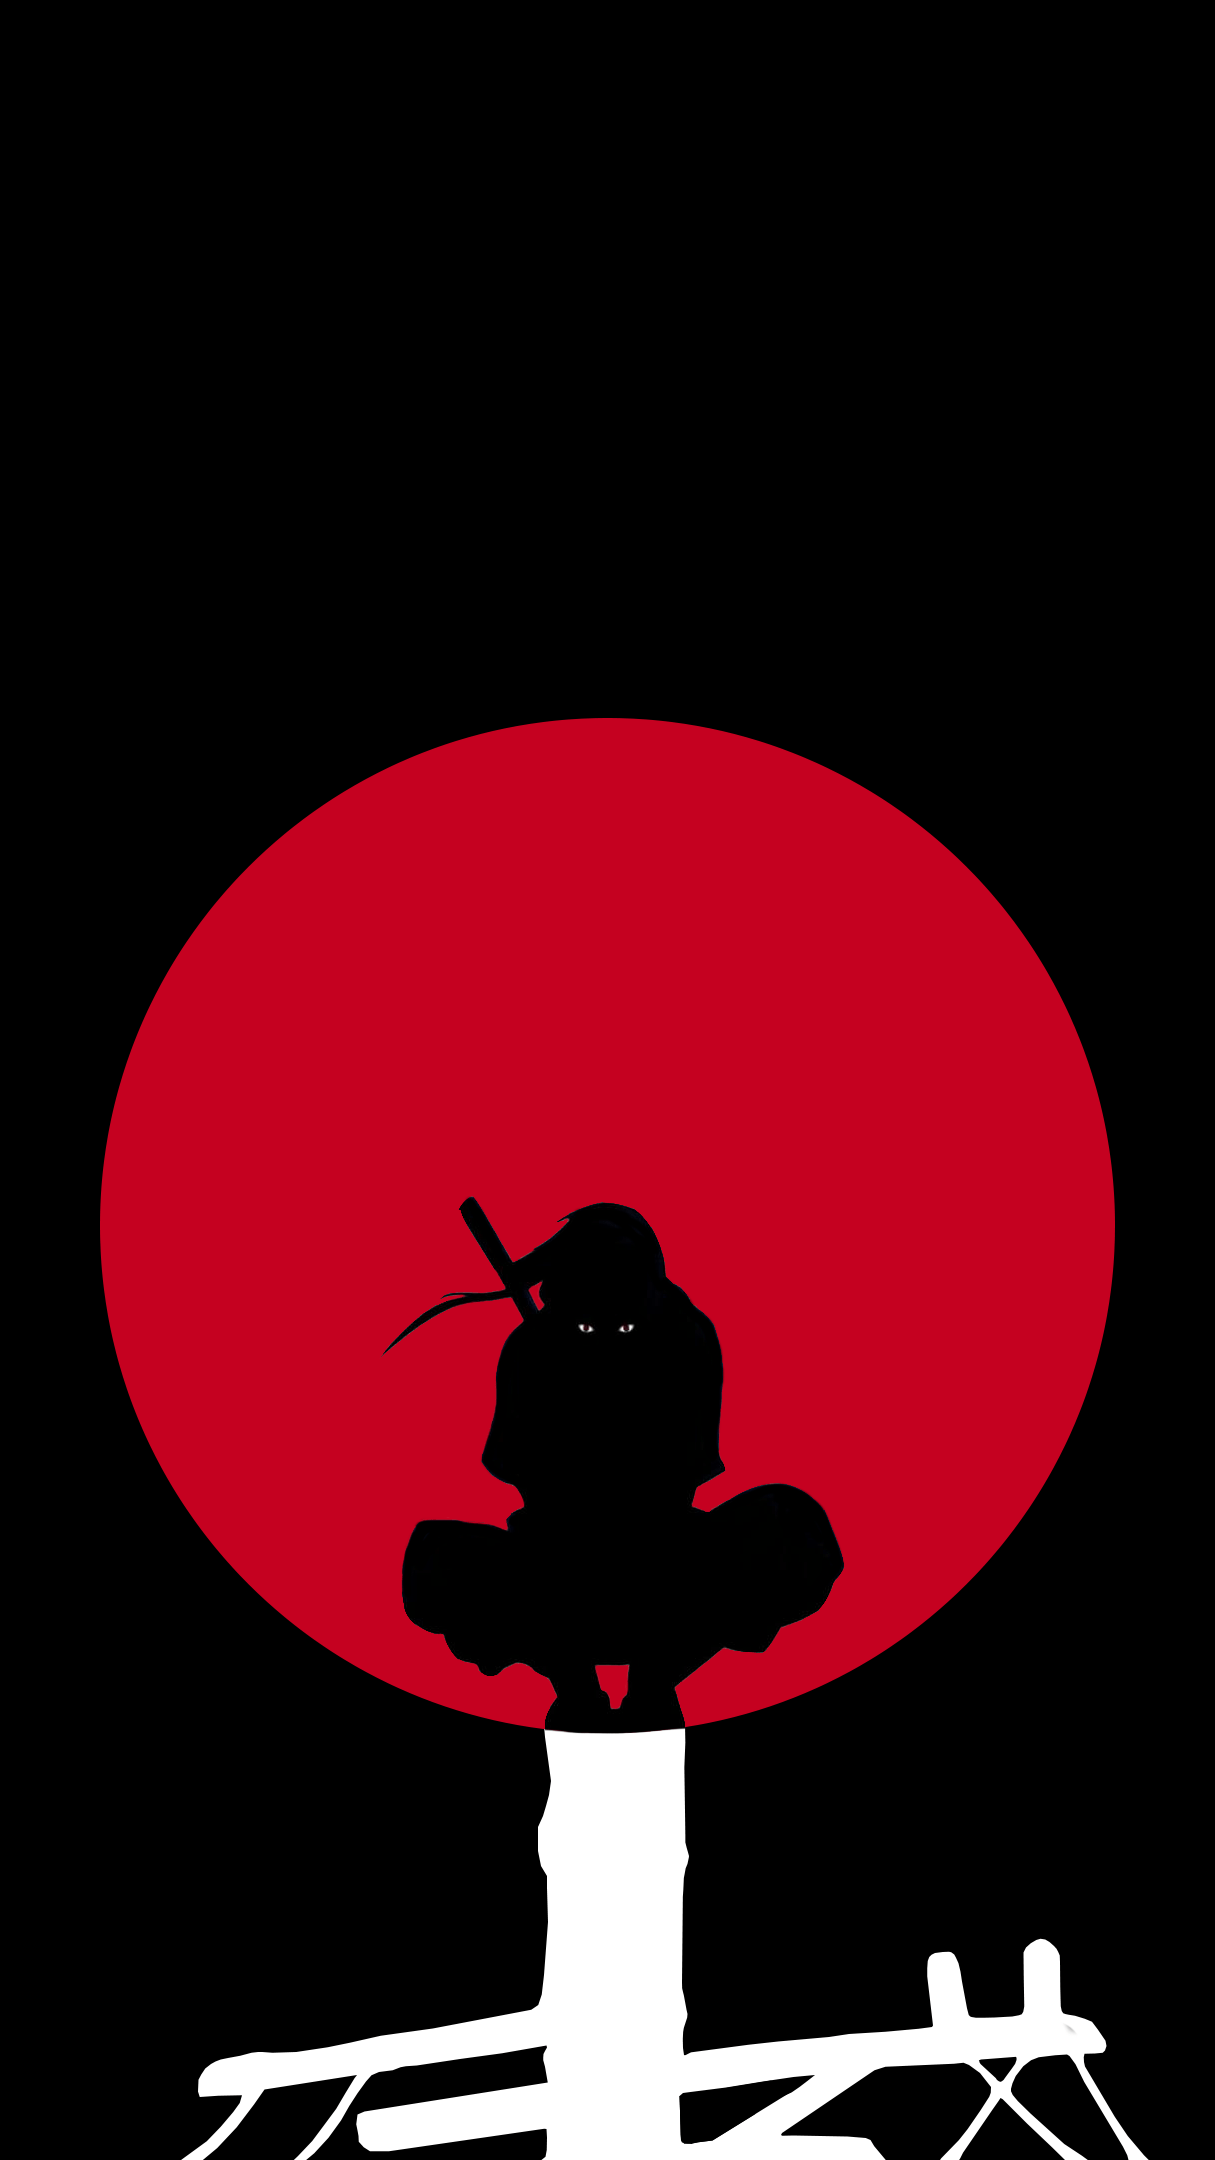 Since there were no good Itachi amoled wallpapers, I made